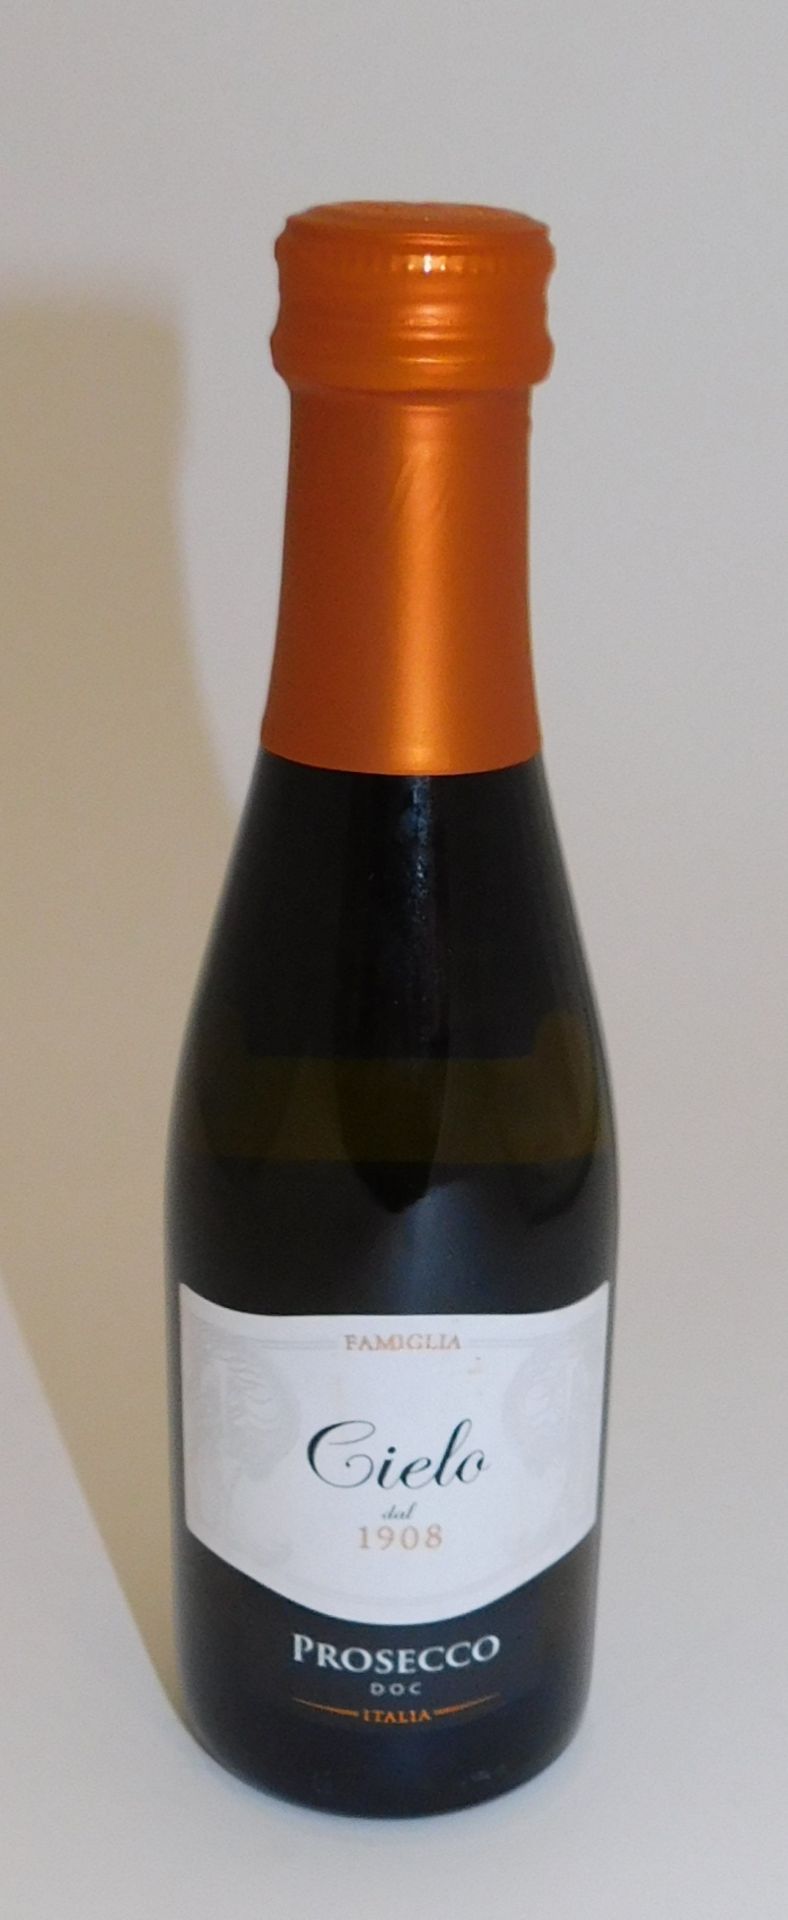 48 Bottles of Cielo Prosecco, 200ml (Located Stockport – See General Notes for More Details)